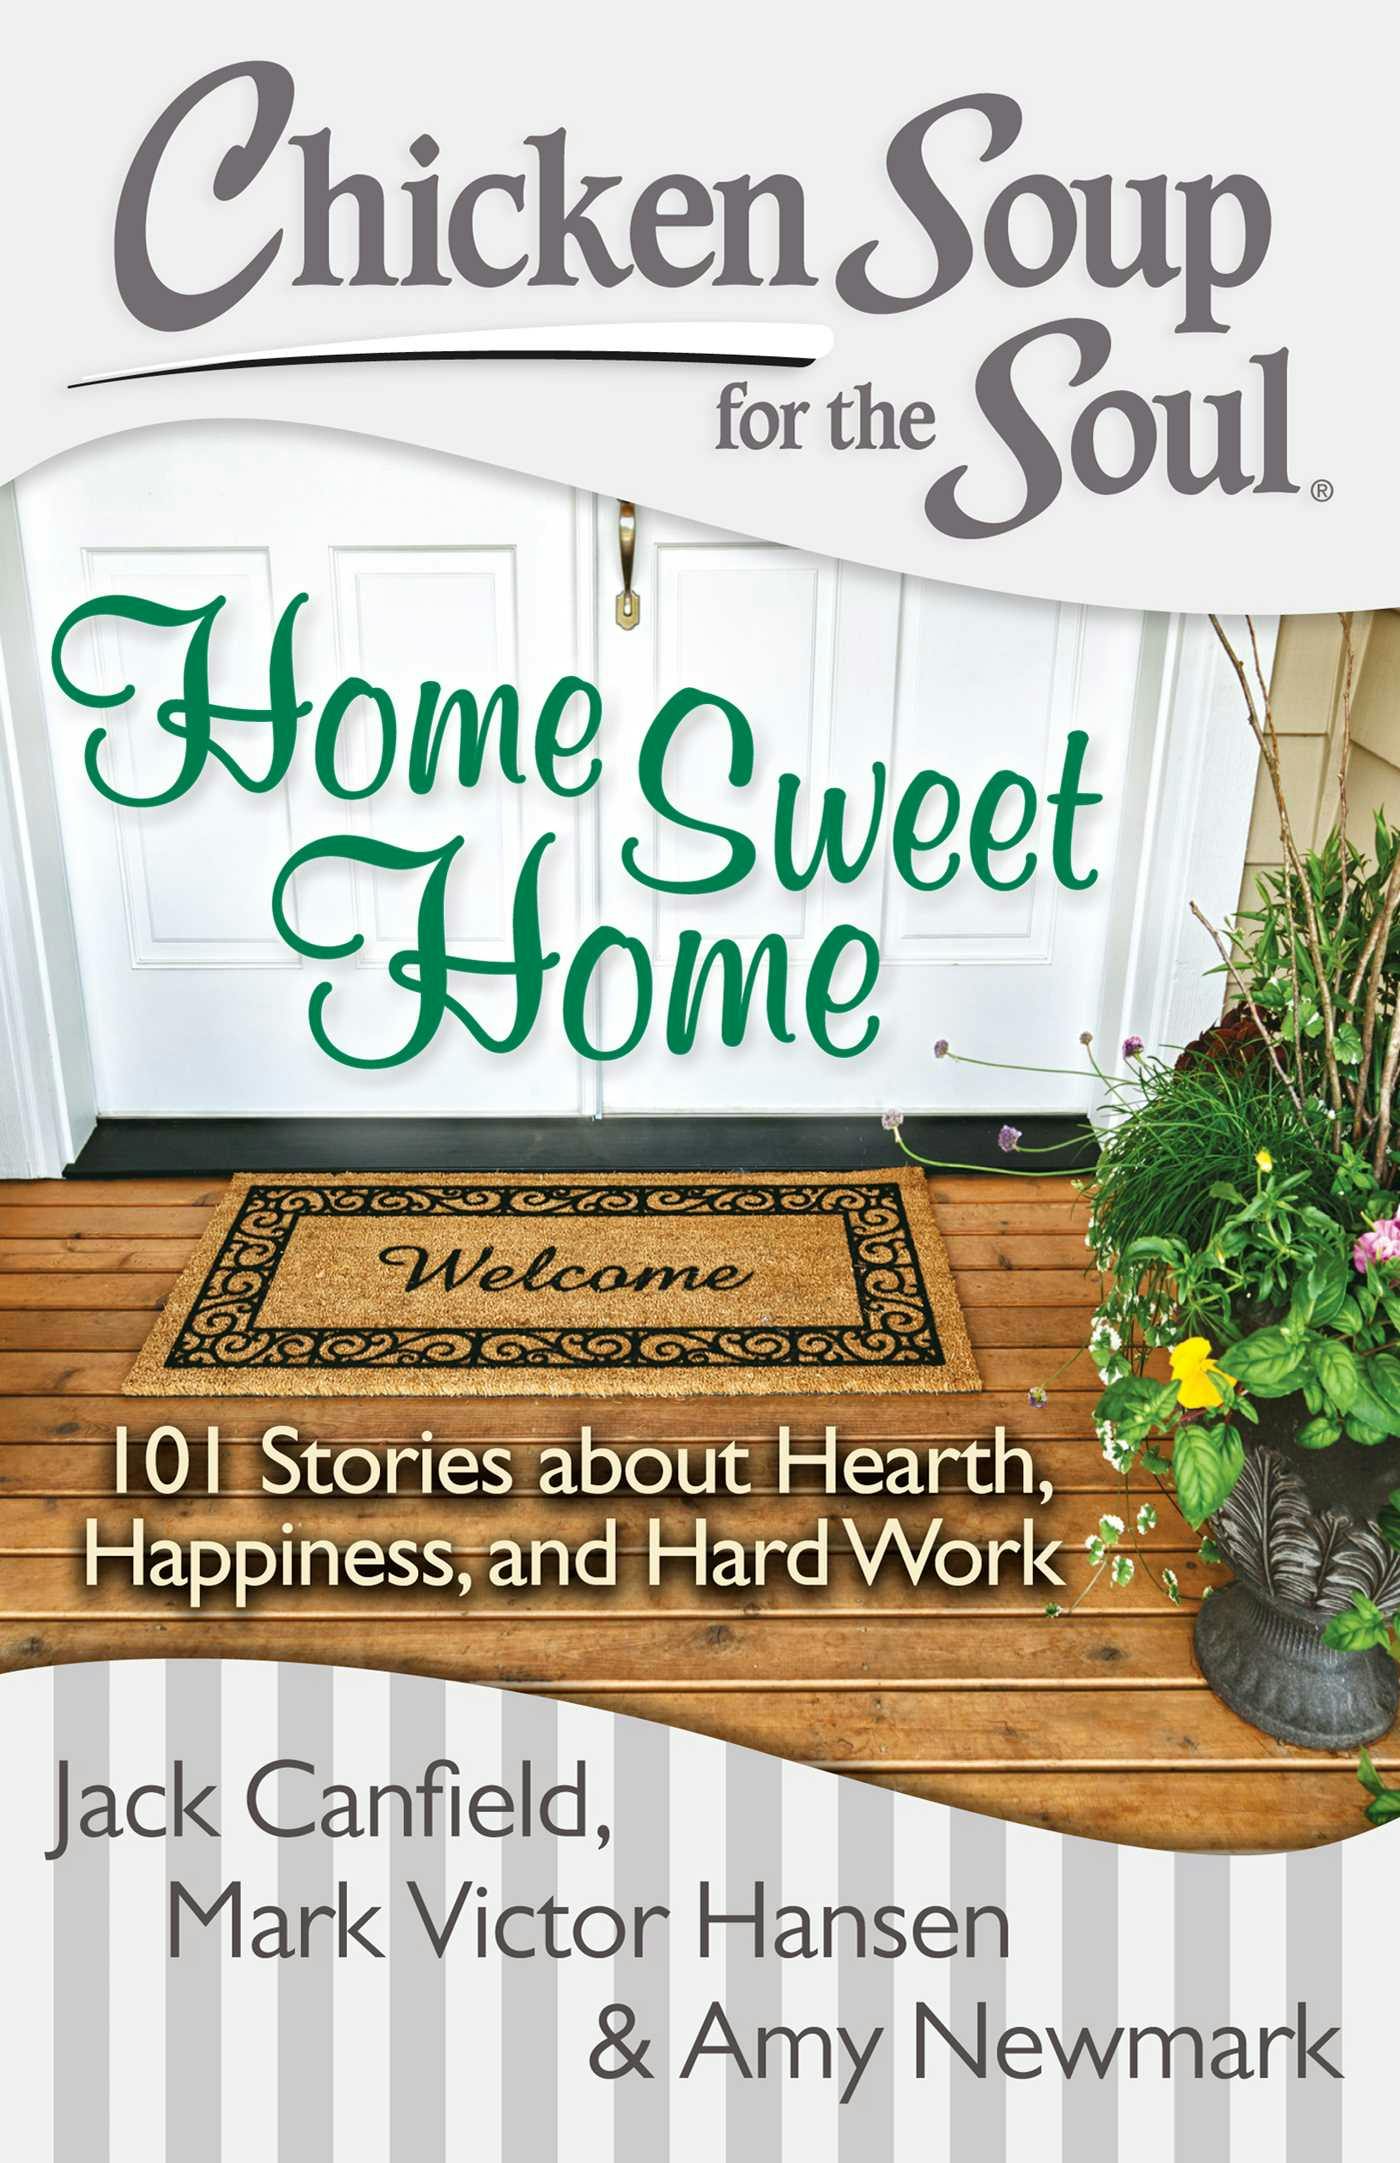 Chicken Soup for the Soul: Home Sweet Home: 101 Stories about Hearth, Happiness, and Hard Work - Mark Victor Hansen, Jack Canfield, Amy Newmark